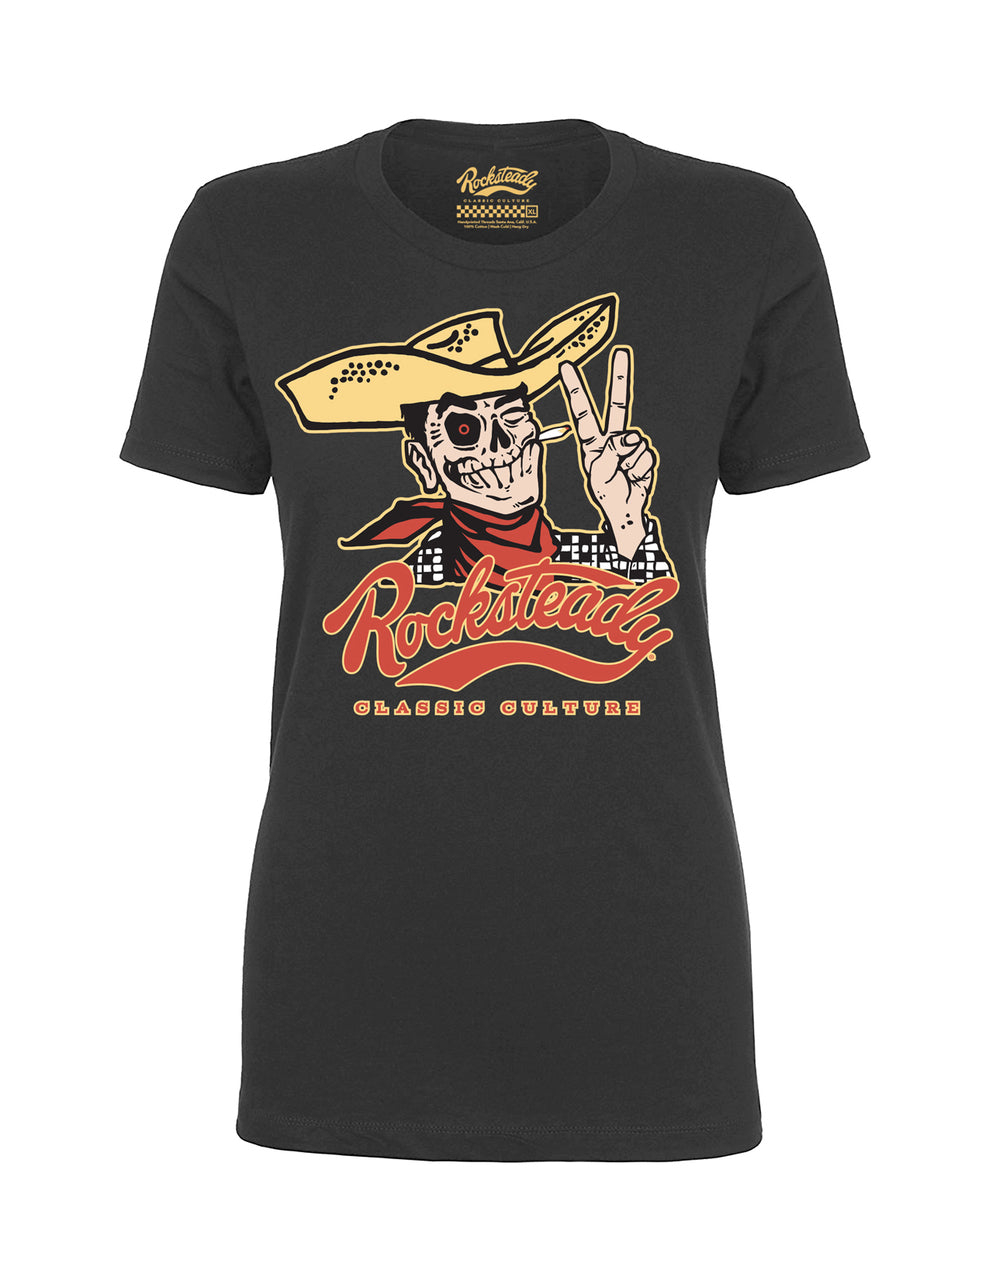 Steady Rocksteady Howdy Ladies T-Shirt Steady Canada grey ladies tee with cowboy guy wearing cowboy hat and smoking a joint holding up peace sign with Rocksteady logo yellow grey and red graphic retro vintage pinup rockabilly rock and roll western altfashion ladies top Canadian Pin-Up Shop Suzie's Bombshell Boutique Port Dover